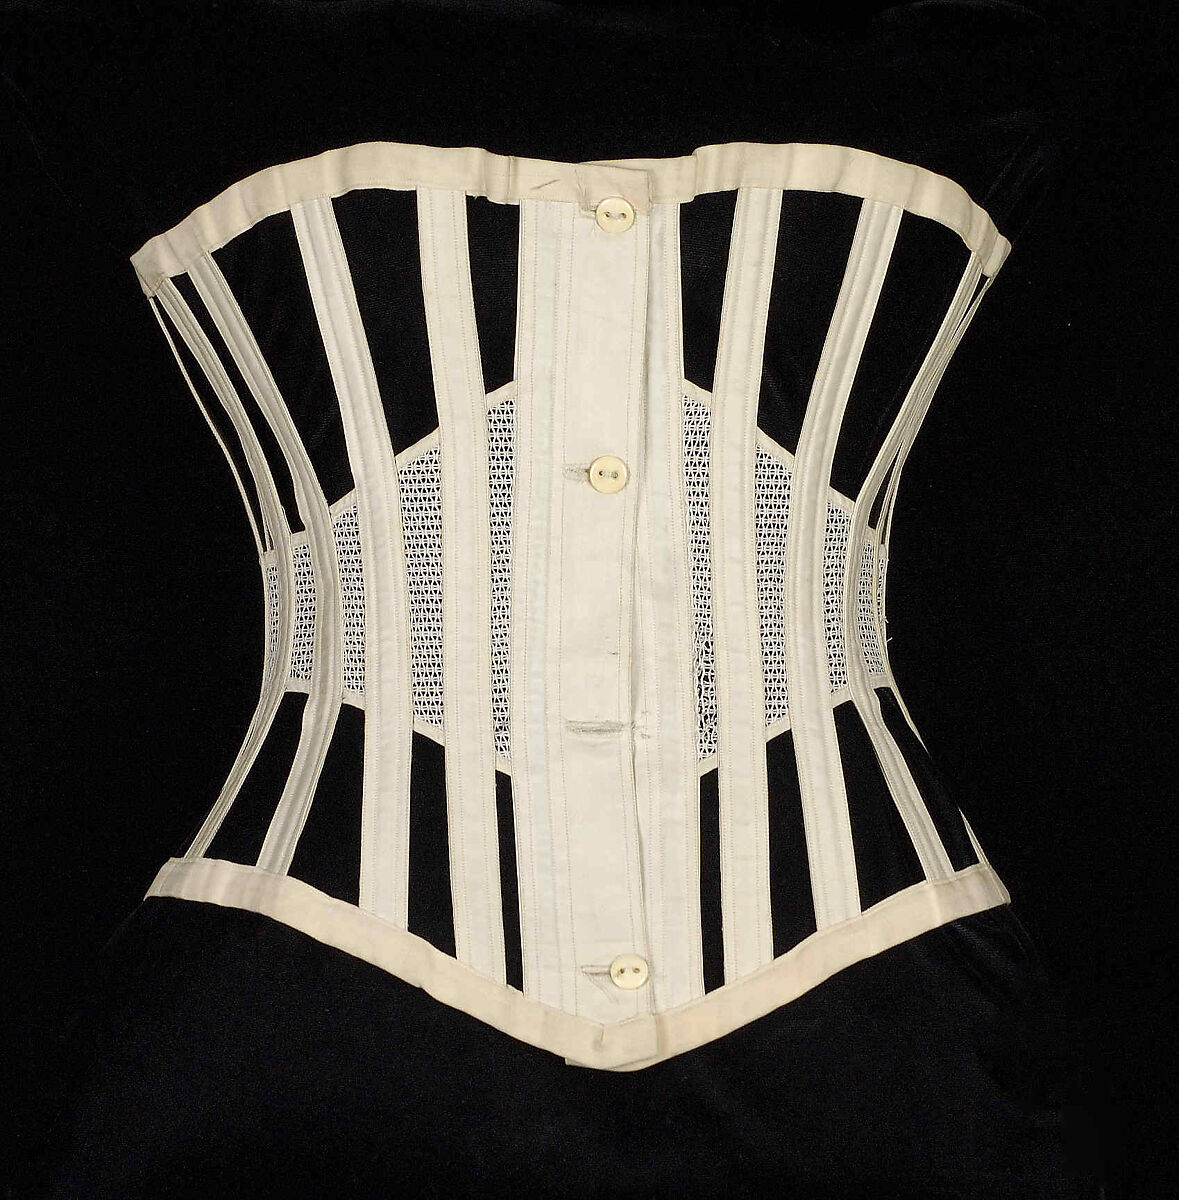 Attributed to Royal Worcester Corset Company